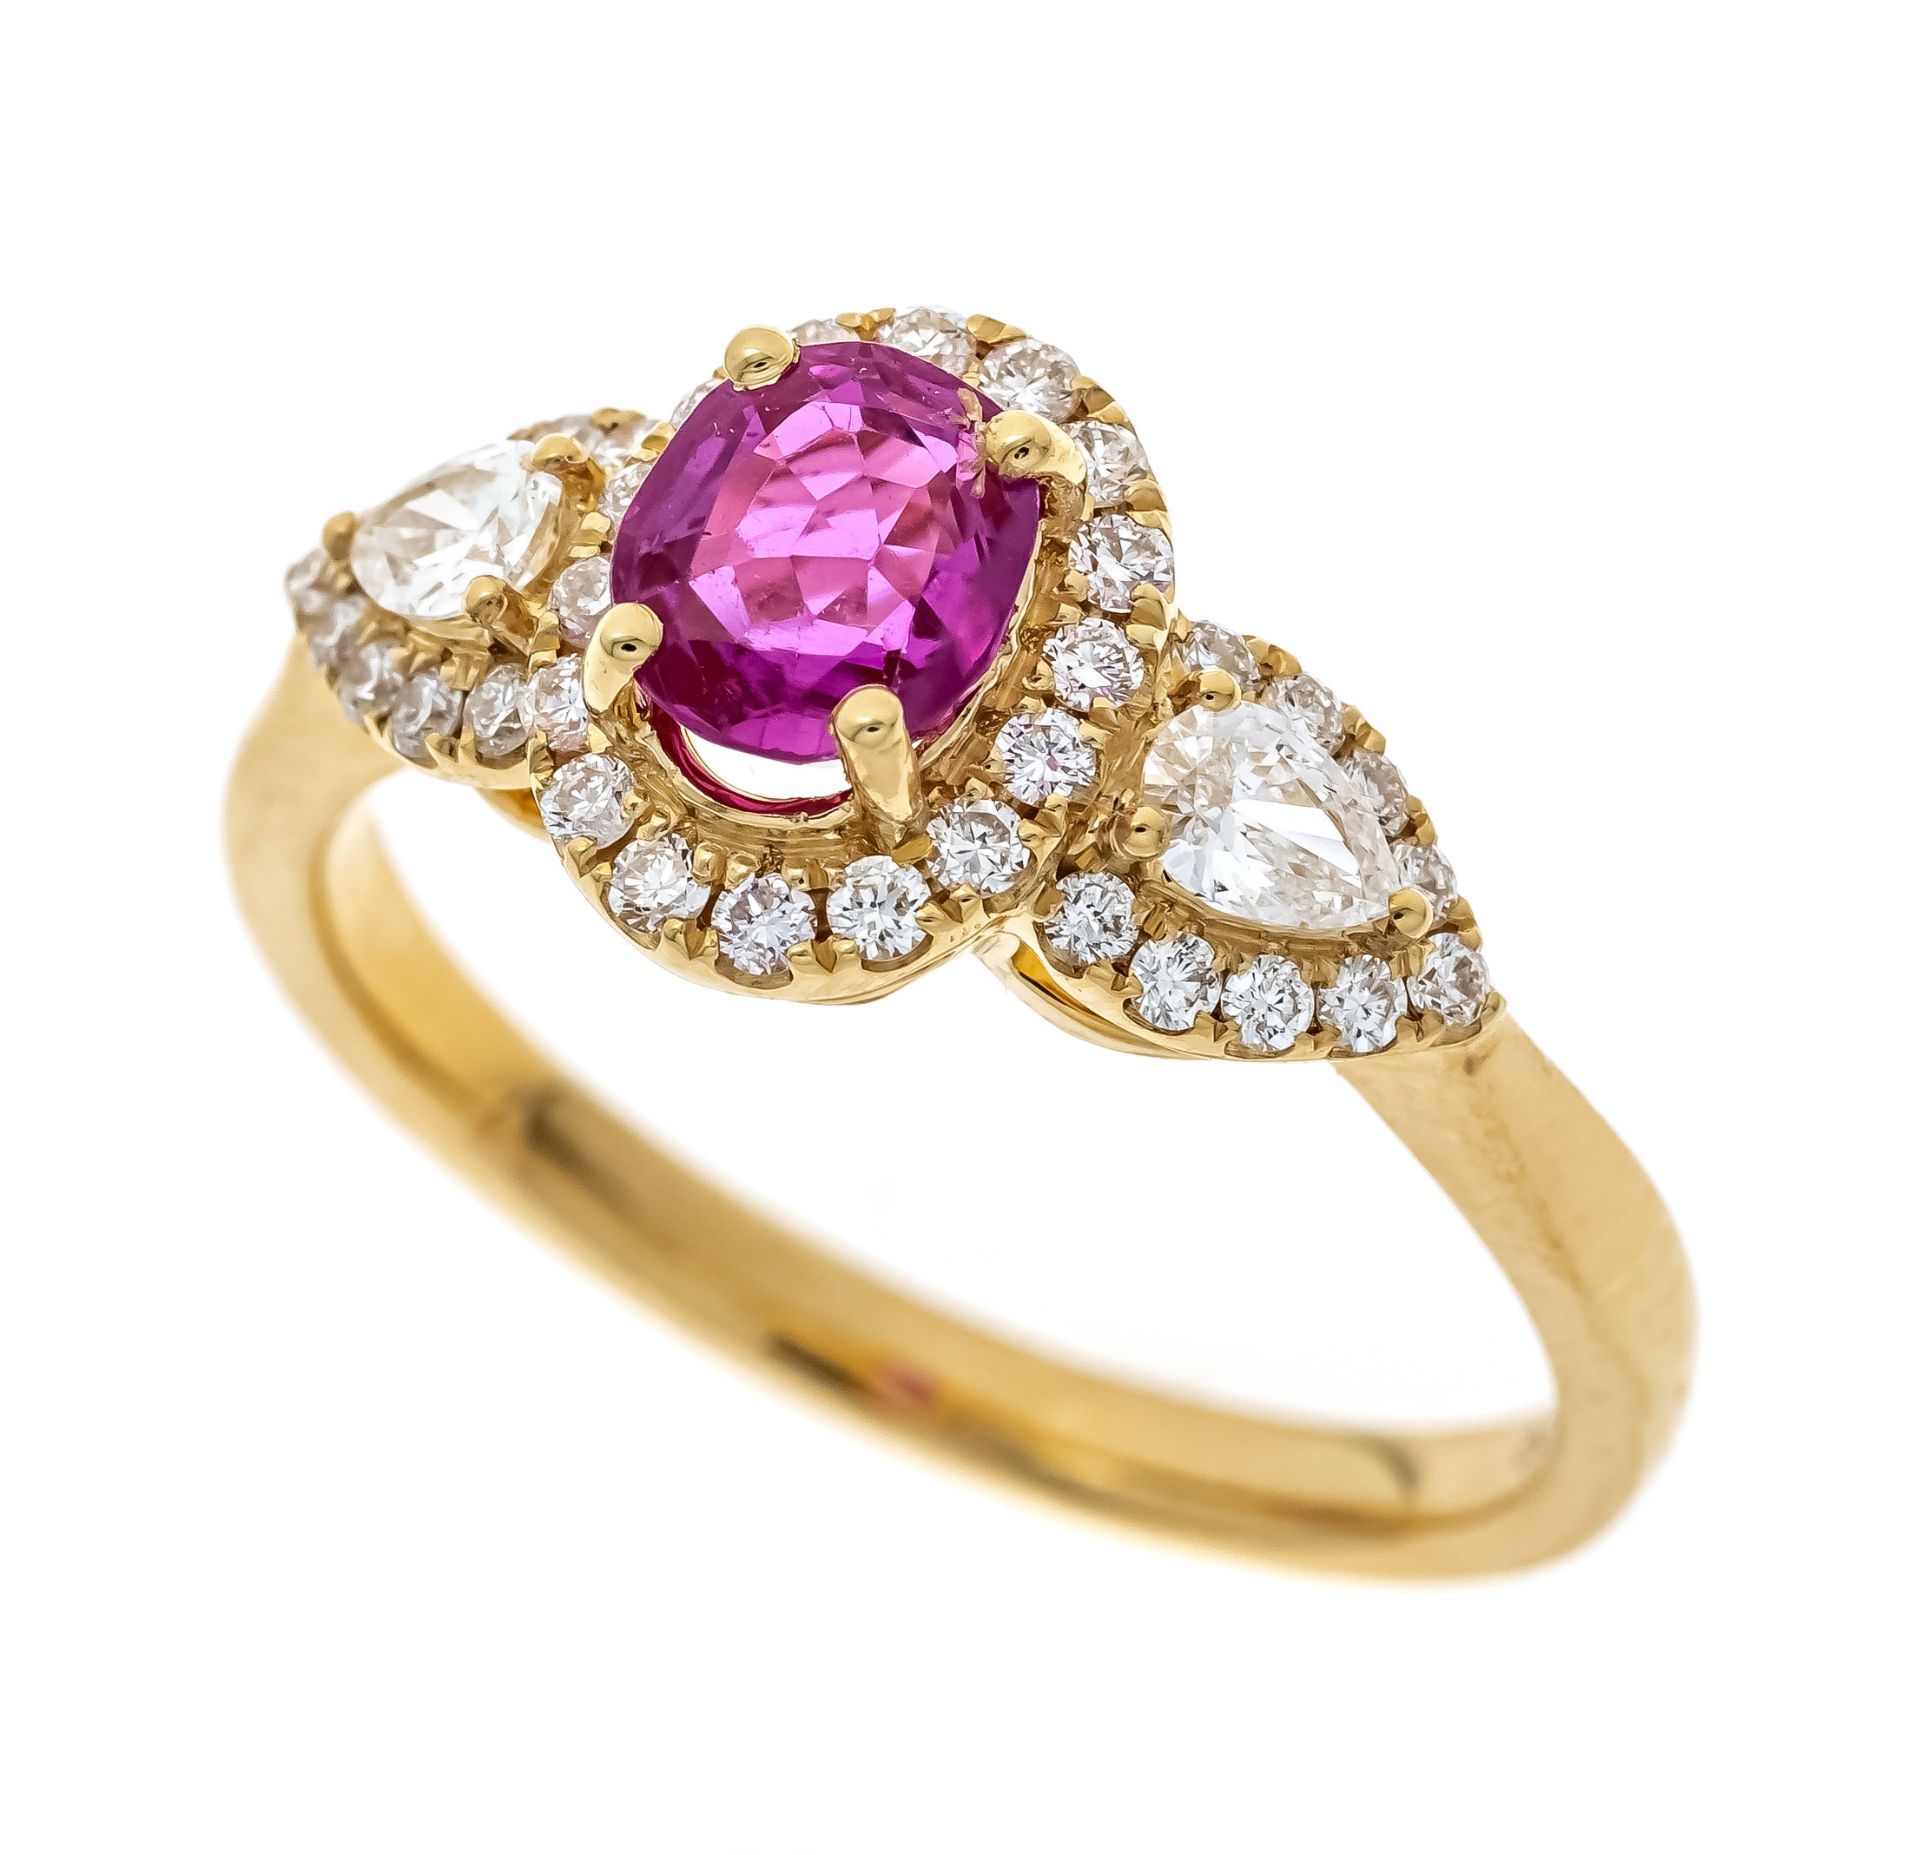 Ruby diamond ring GG 750/000 with one natural untreated oval faceted ruby 0.60 ct lighter pinkish